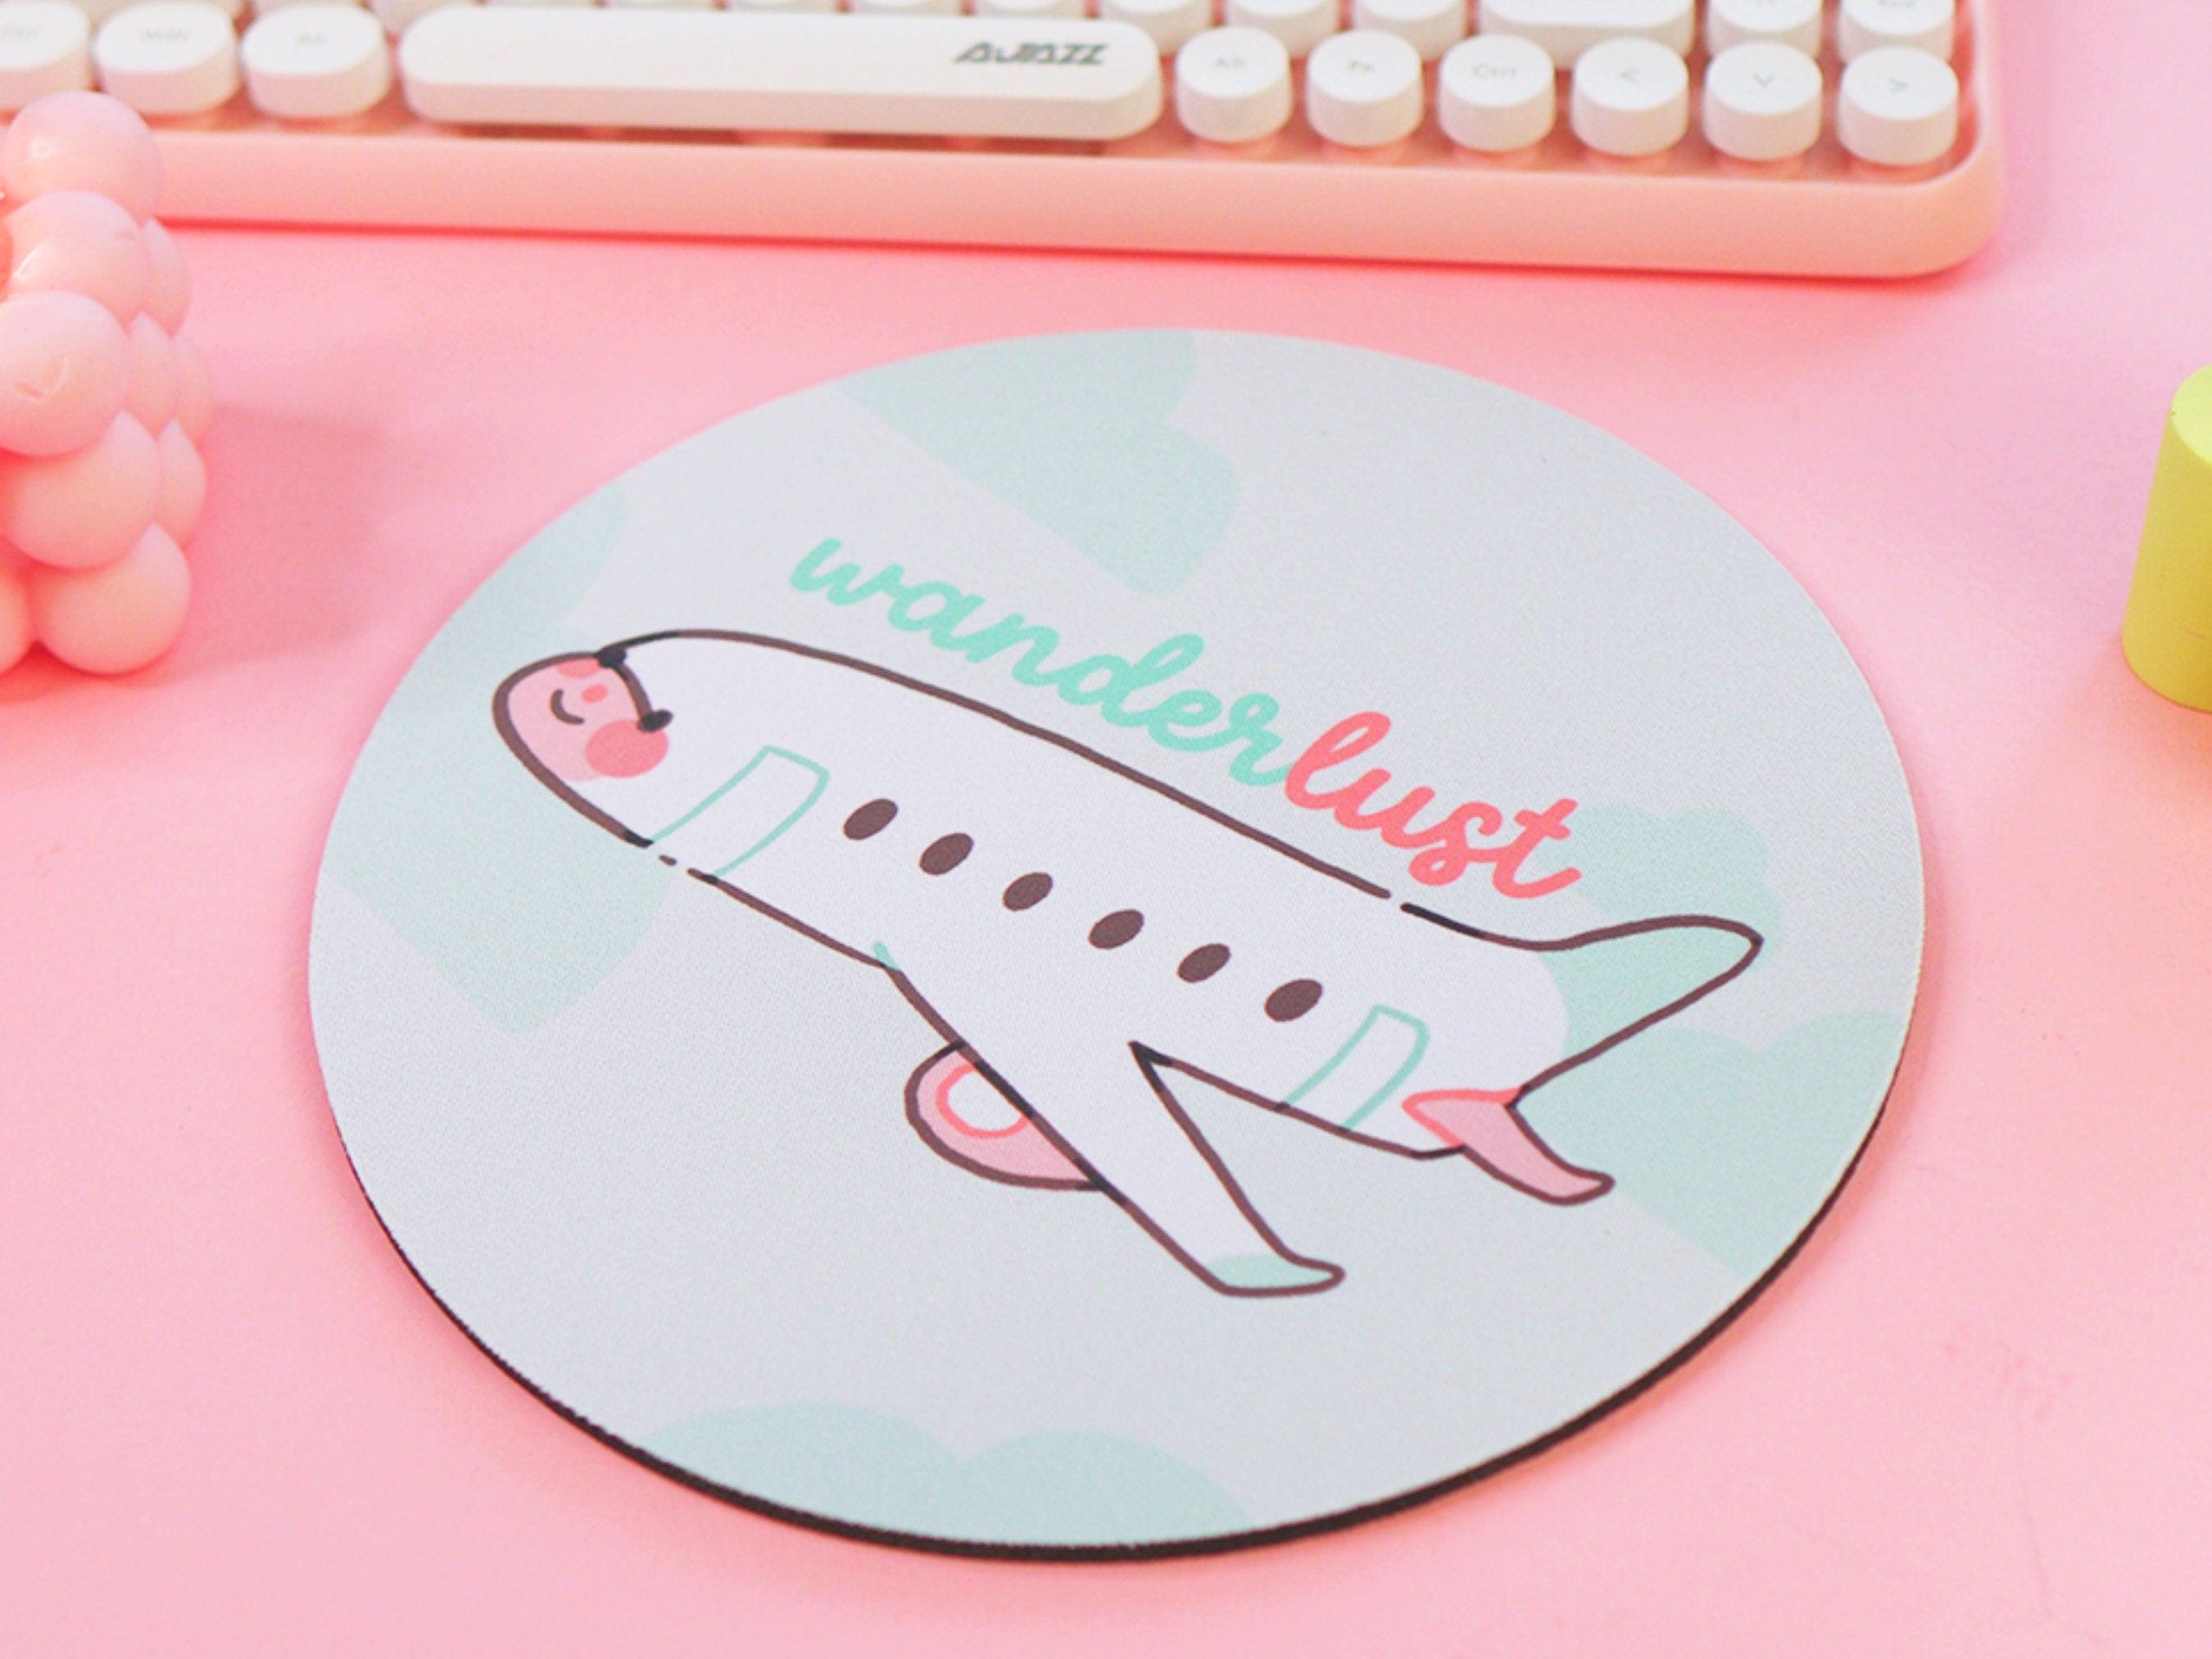 Wanderlust Colourful Mousemat ~ Travel Lover Mouse Pad - Katnipp Illustrations